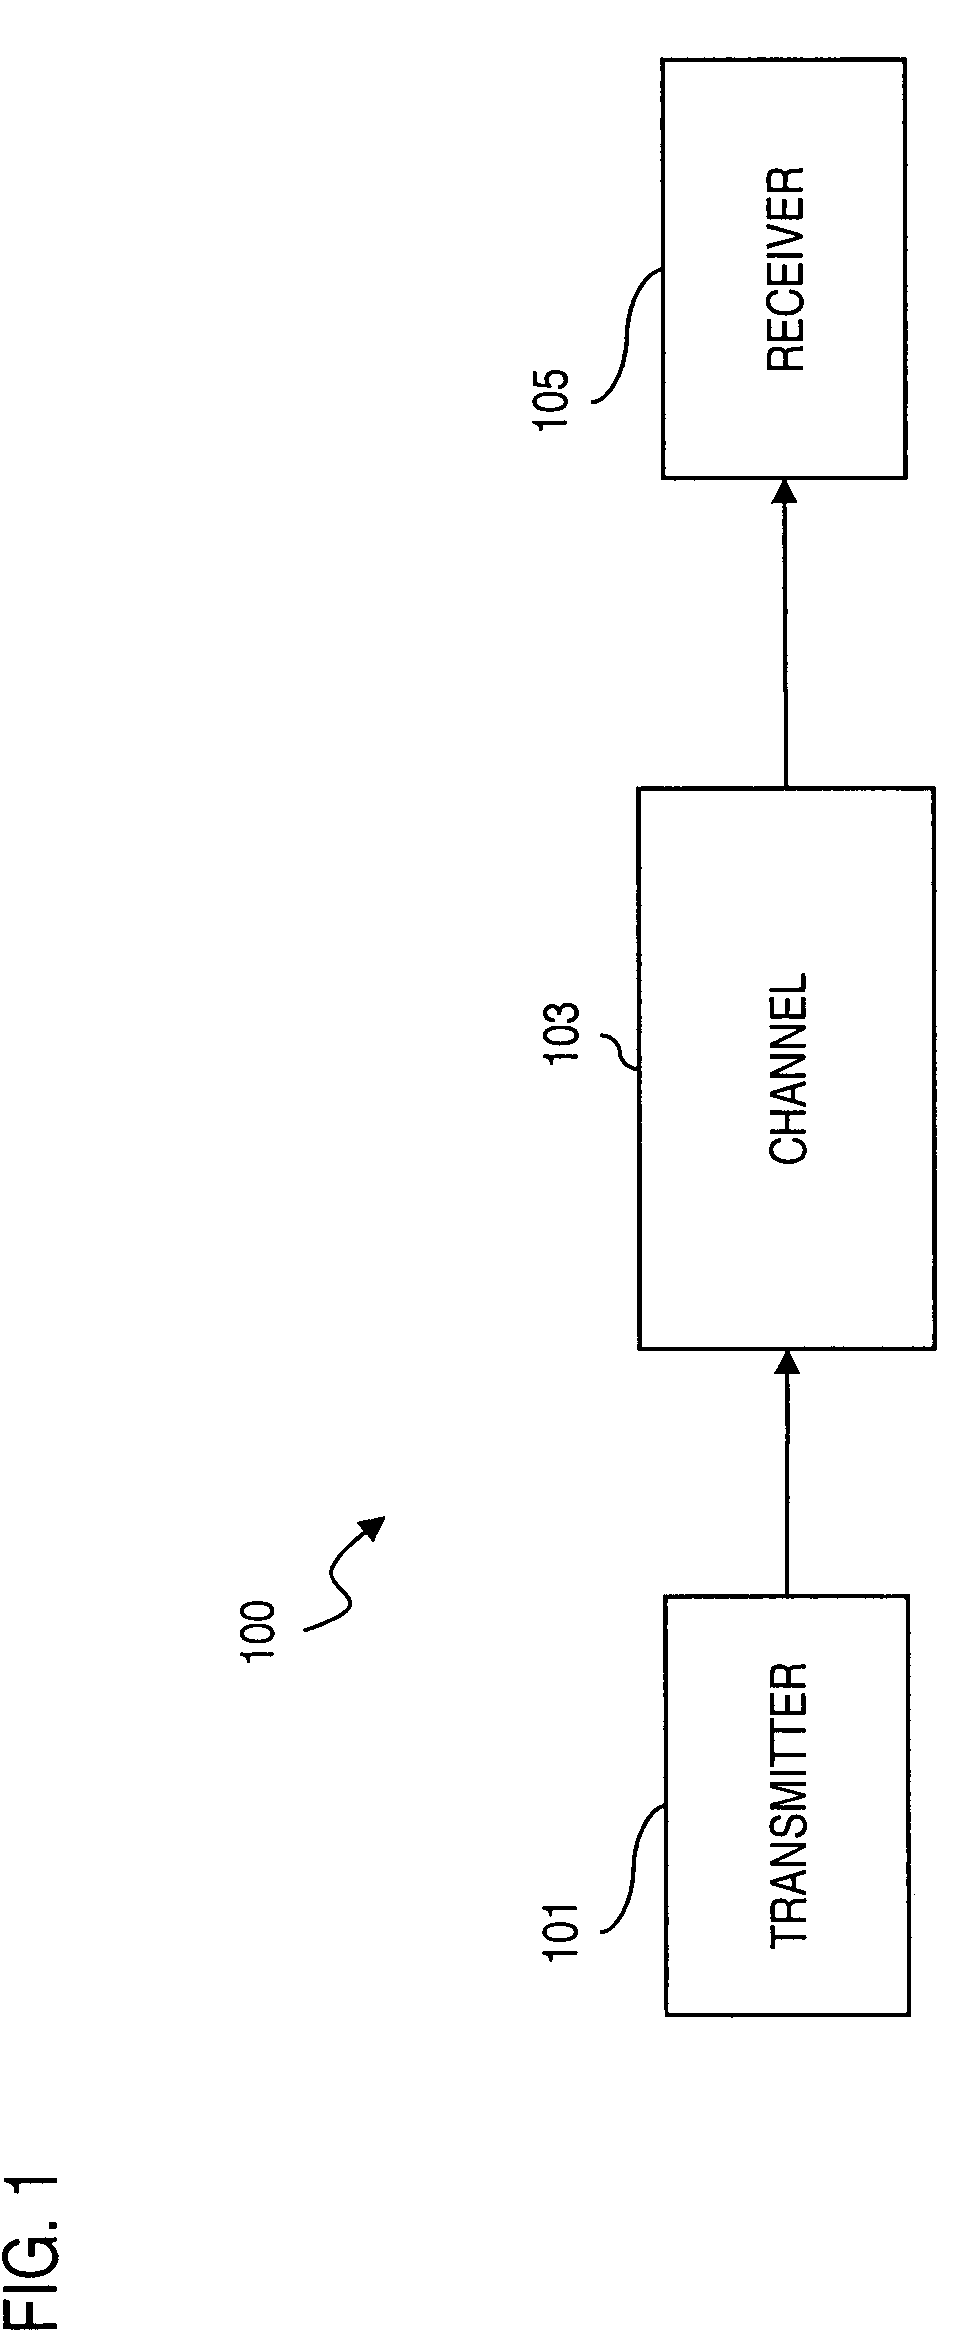 Method and system for providing low density parity check (LDPC) encoding